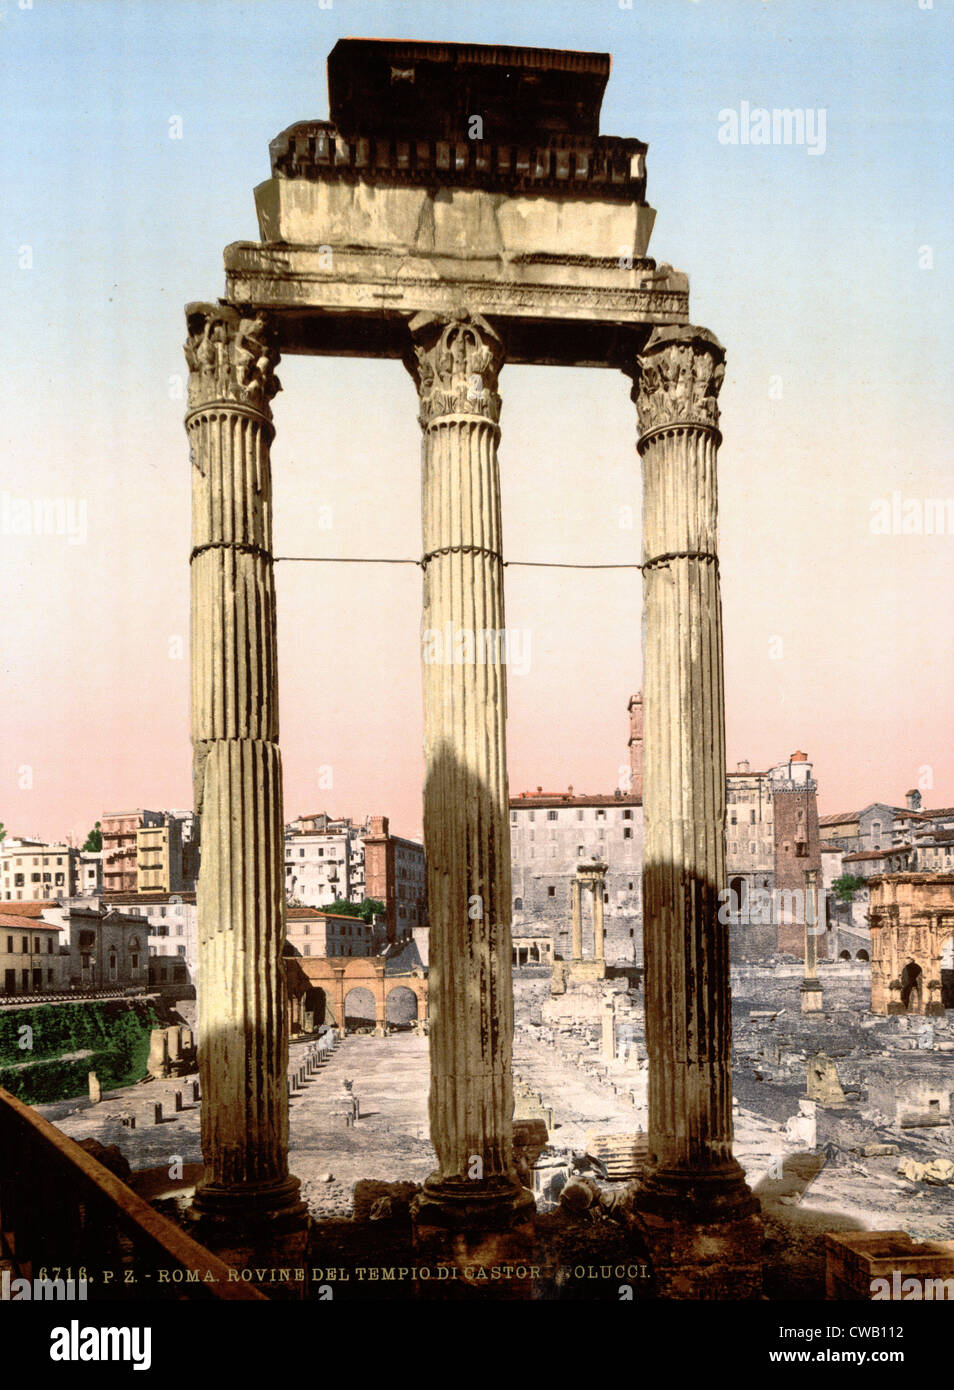 Rome, Ruins of Temple of Castor and Pollux, Rome, Italy, ca 1890s Stock Photo